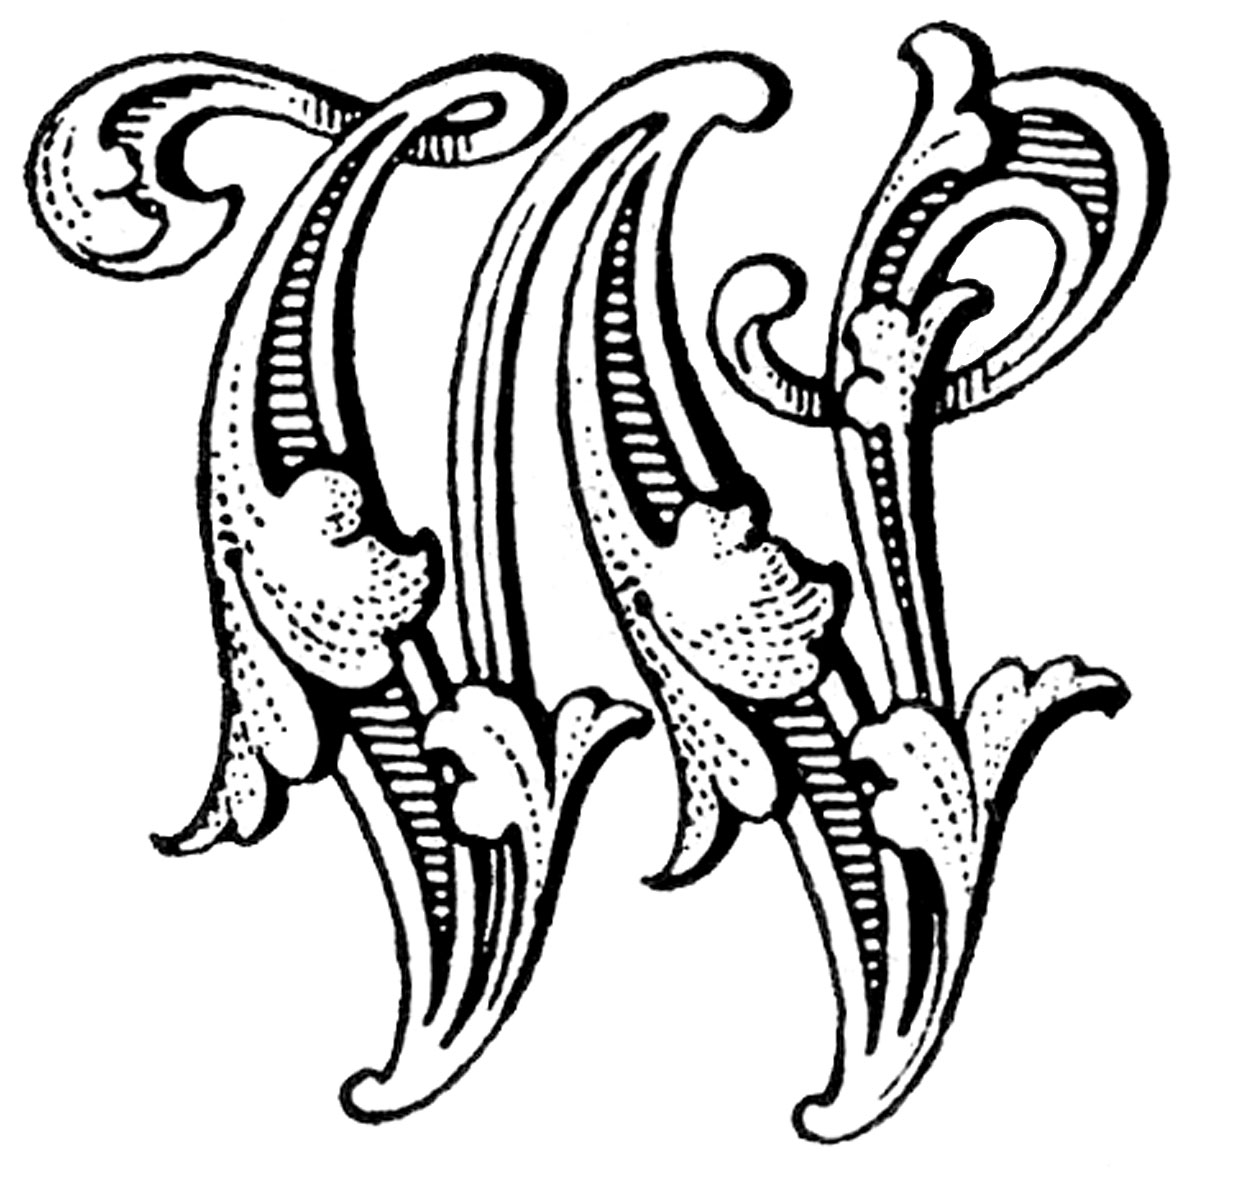 The Letter W   This Ornate Image Comes From An Antique Monogram Book